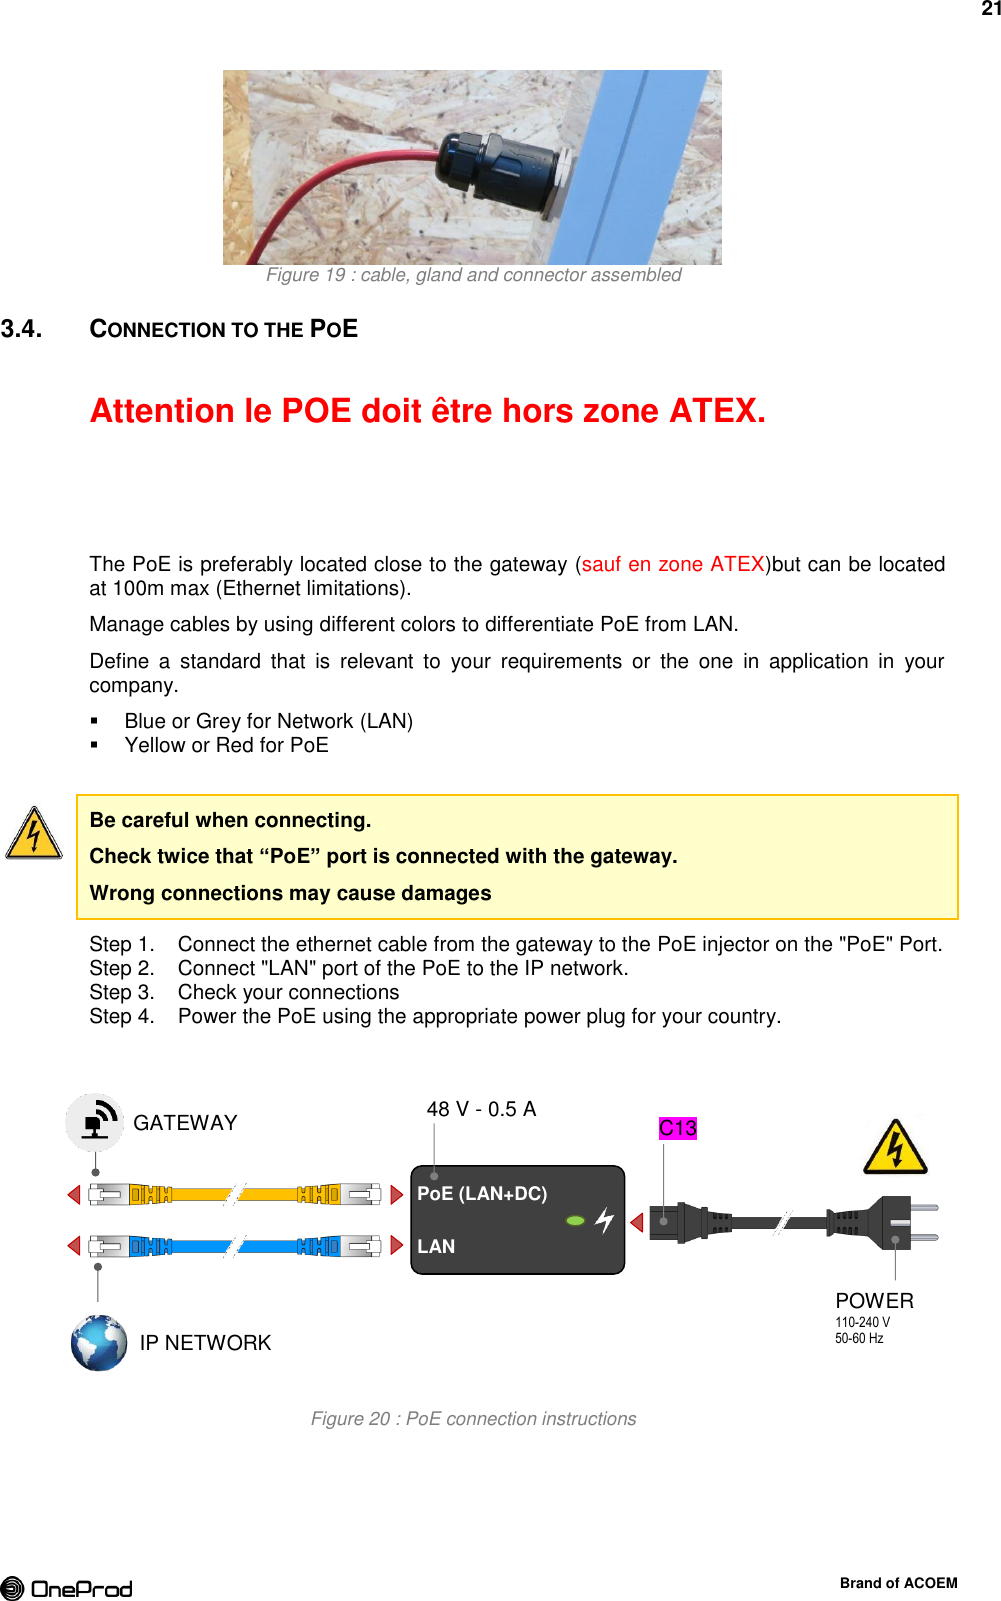 21  Brand of ACOEM  Figure 19 : cable, gland and connector assembled 3.4.  CONNECTION TO THE POE  Attention le POE doit être hors zone ATEX.    The PoE is preferably located close to the gateway (sauf en zone ATEX)but can be located at 100m max (Ethernet limitations). Manage cables by using different colors to differentiate PoE from LAN. Define  a  standard  that  is  relevant  to  your  requirements  or  the  one  in  application  in  your company.   Blue or Grey for Network (LAN)   Yellow or Red for PoE  Be careful when connecting. Check twice that “PoE” port is connected with the gateway. Wrong connections may cause damages   Connect the ethernet cable from the gateway to the PoE injector on the &quot;PoE&quot; Port. Step 1.  Connect &quot;LAN&quot; port of the PoE to the IP network. Step 2.  Check your connections Step 3.  Power the PoE using the appropriate power plug for your country. Step 4.  Figure 20 : PoE connection instructions         PoE (LAN+DC) LAN GATEWAY IP NETWORK POWER 110-240 V 50-60 Hz  C13 48 V - 0.5 A 